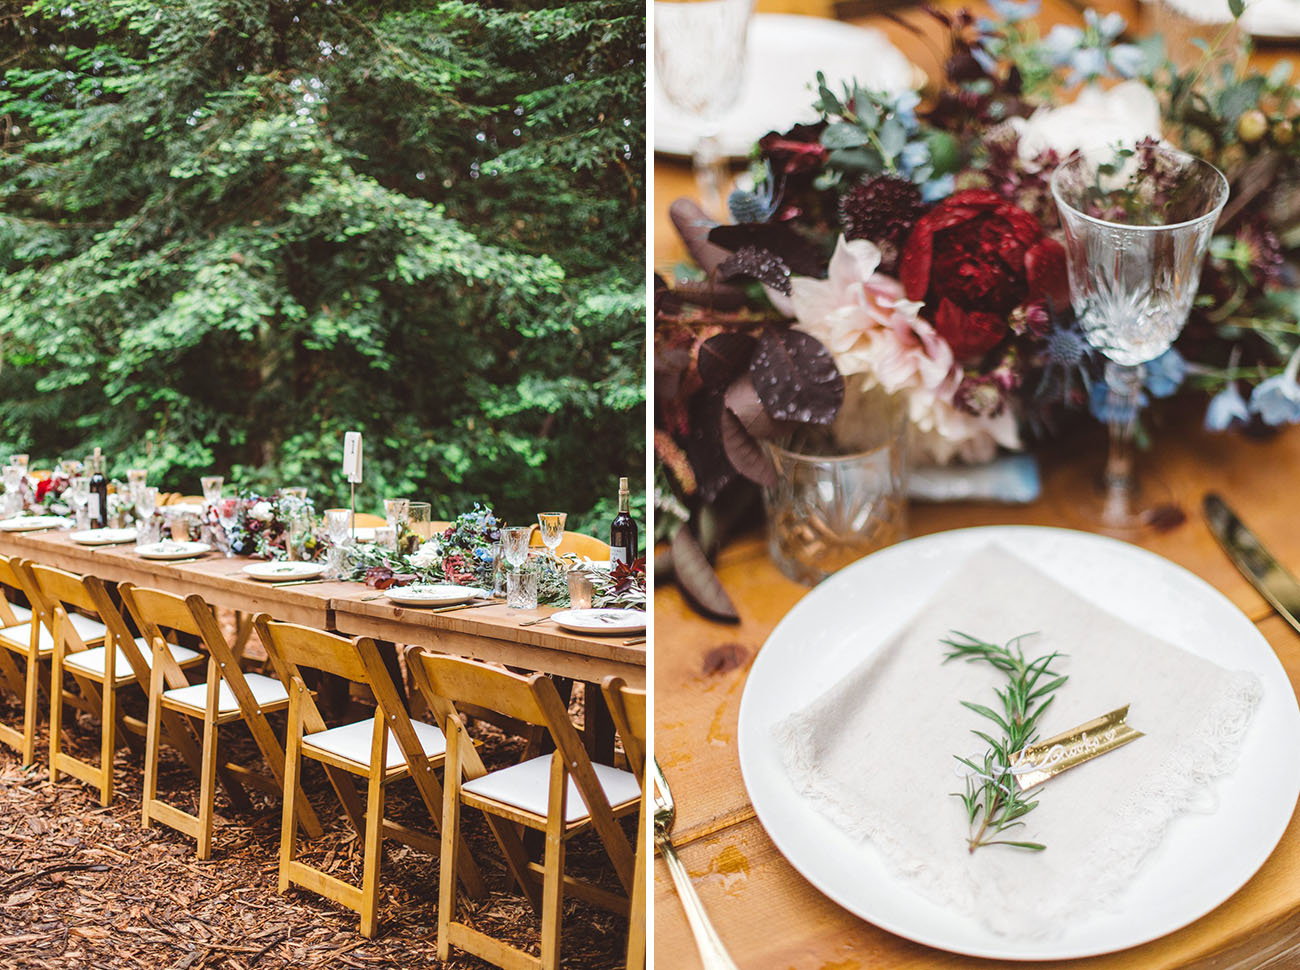 The reception was also a woodland one, with cool greenery and flower table runners